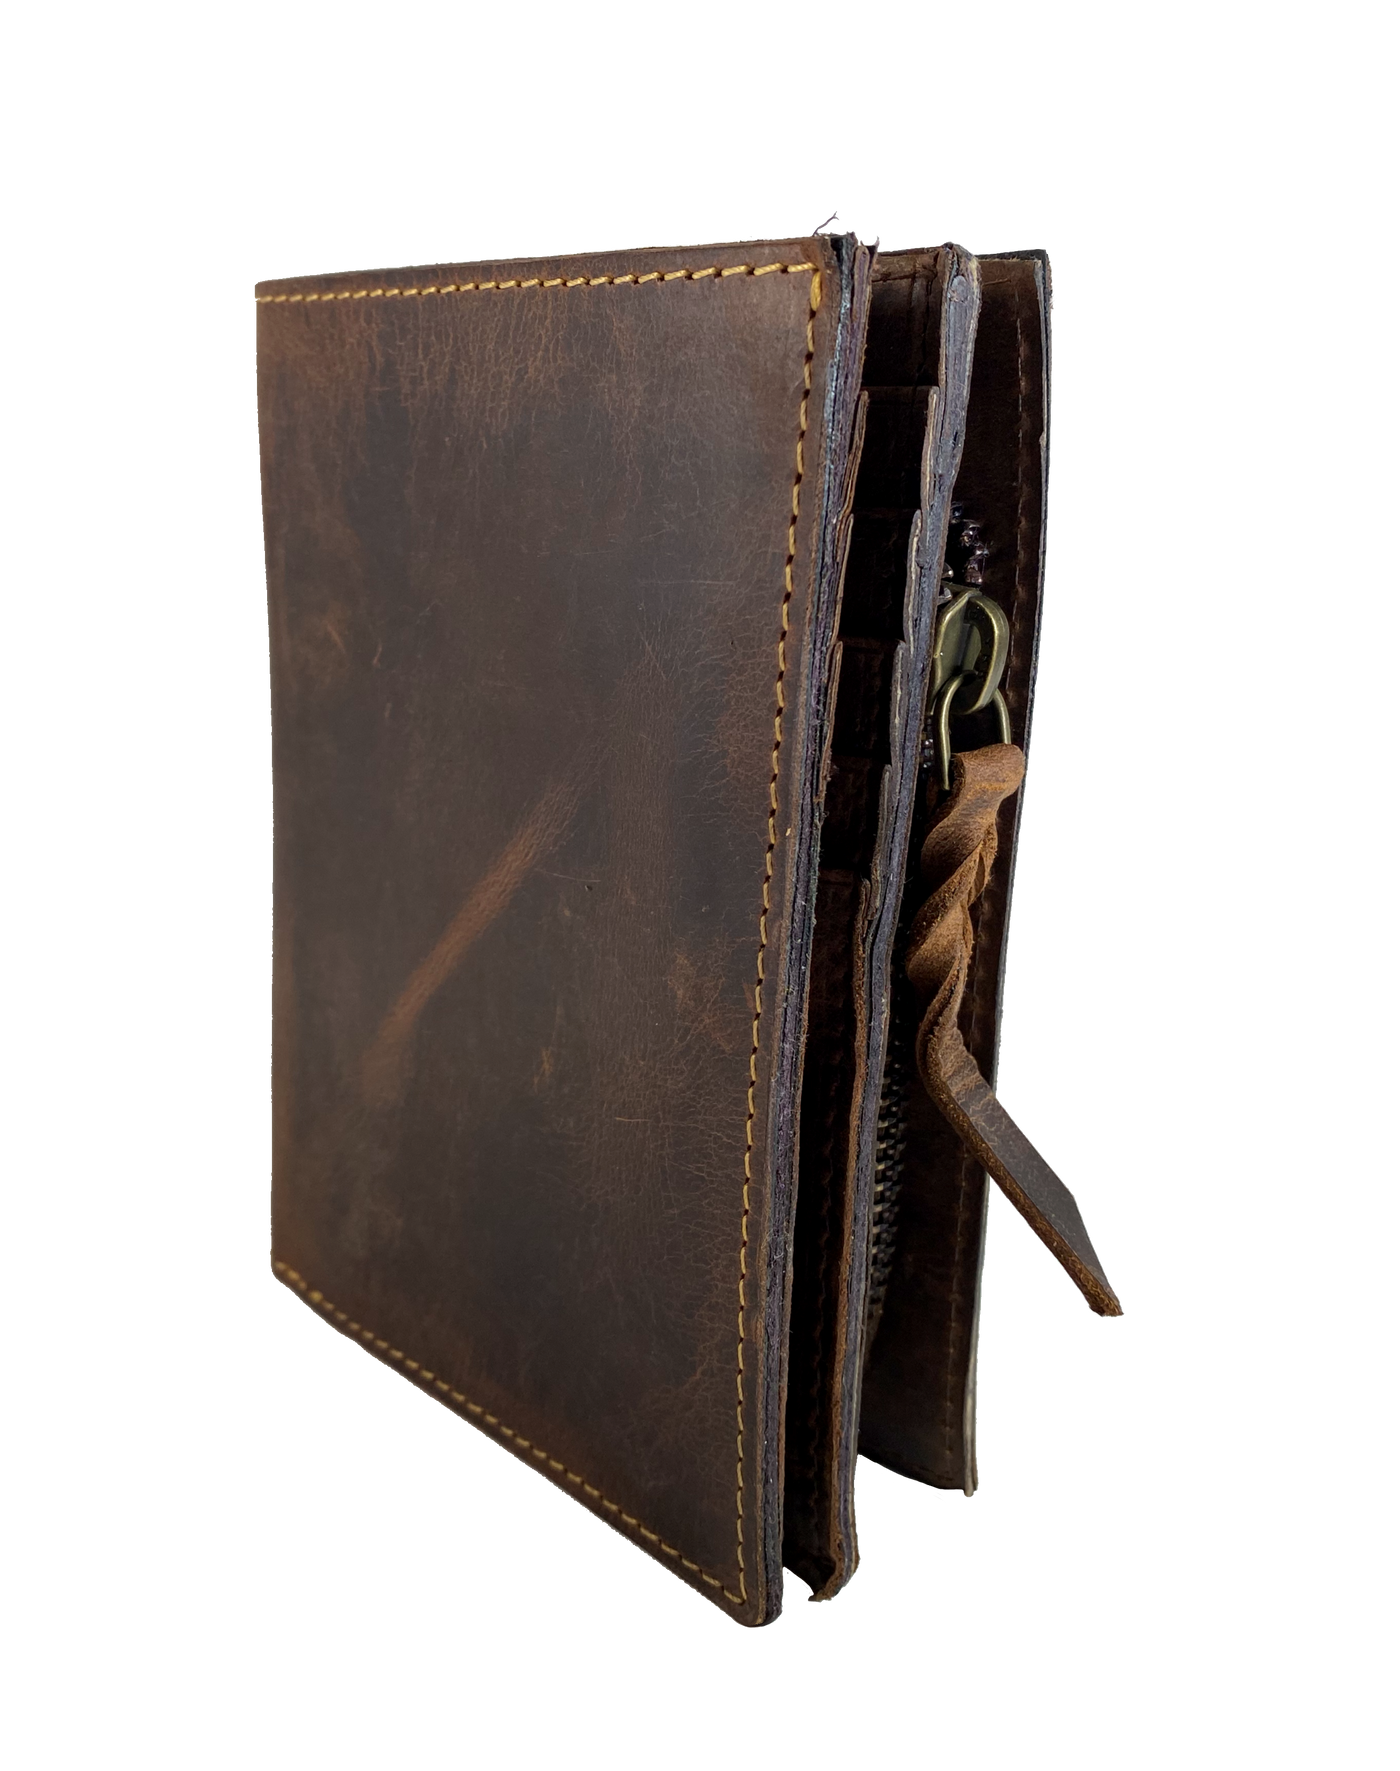 Popular Distressed Brown Multi Fold Wallet. 1 cash slot, 8 card slots, I.D. slot, zippered coin pocket for all your stash needs. Will darken with a nice patina with use. Imported and Buckle and Hide approved. Great for men or women with lots of cards.